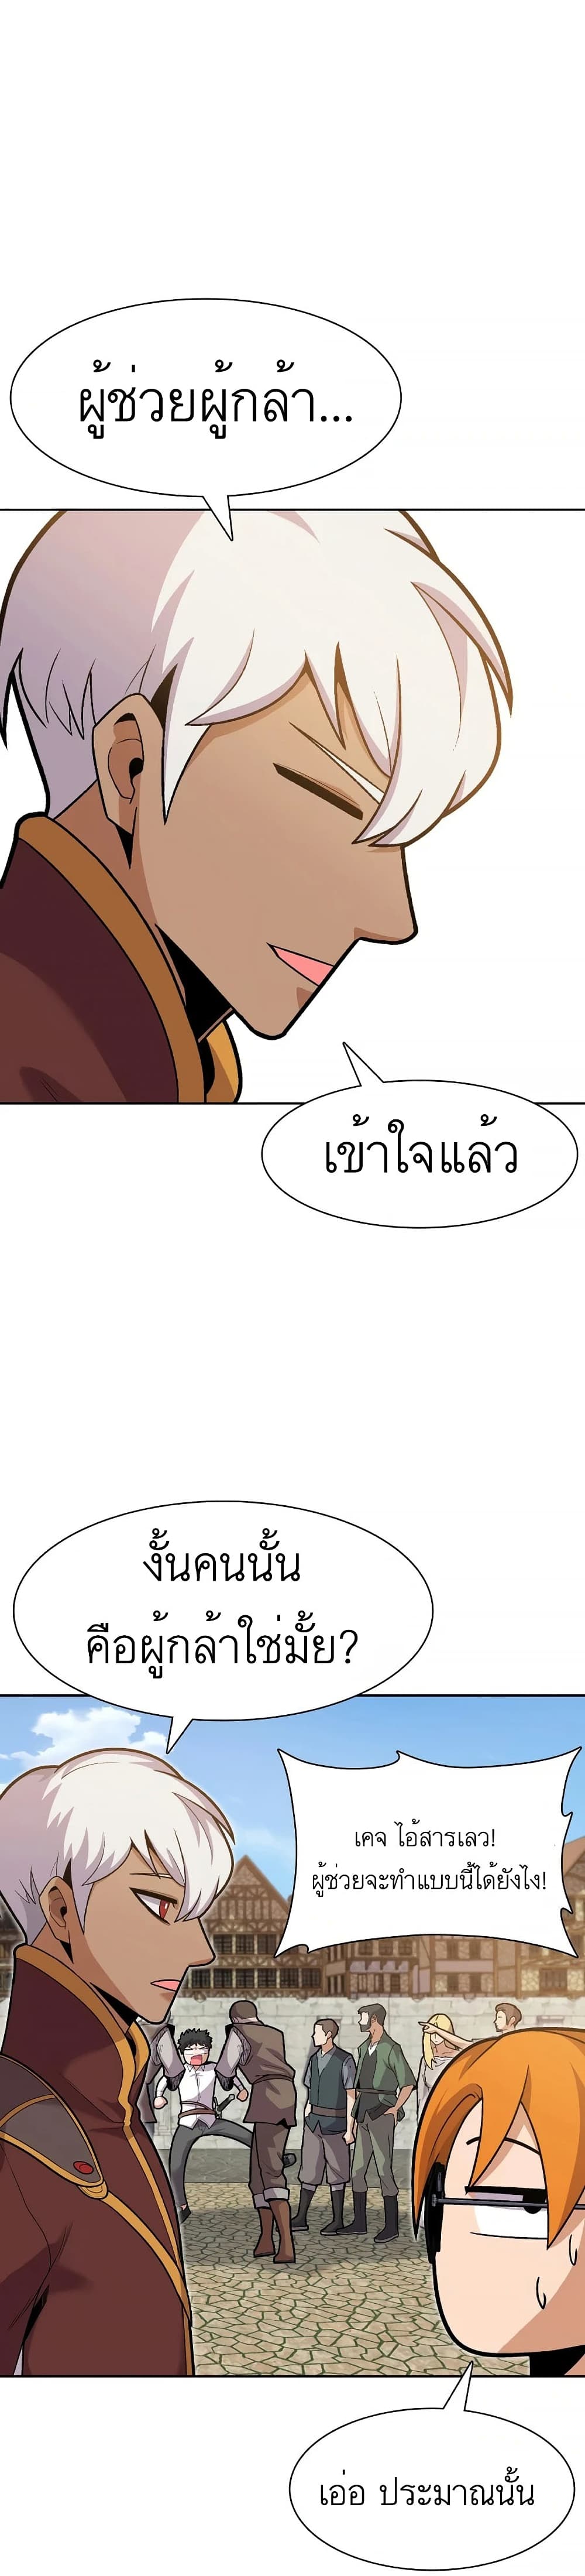 Raising Newbie Heroes In Another World ตอนที่ 13 (11)